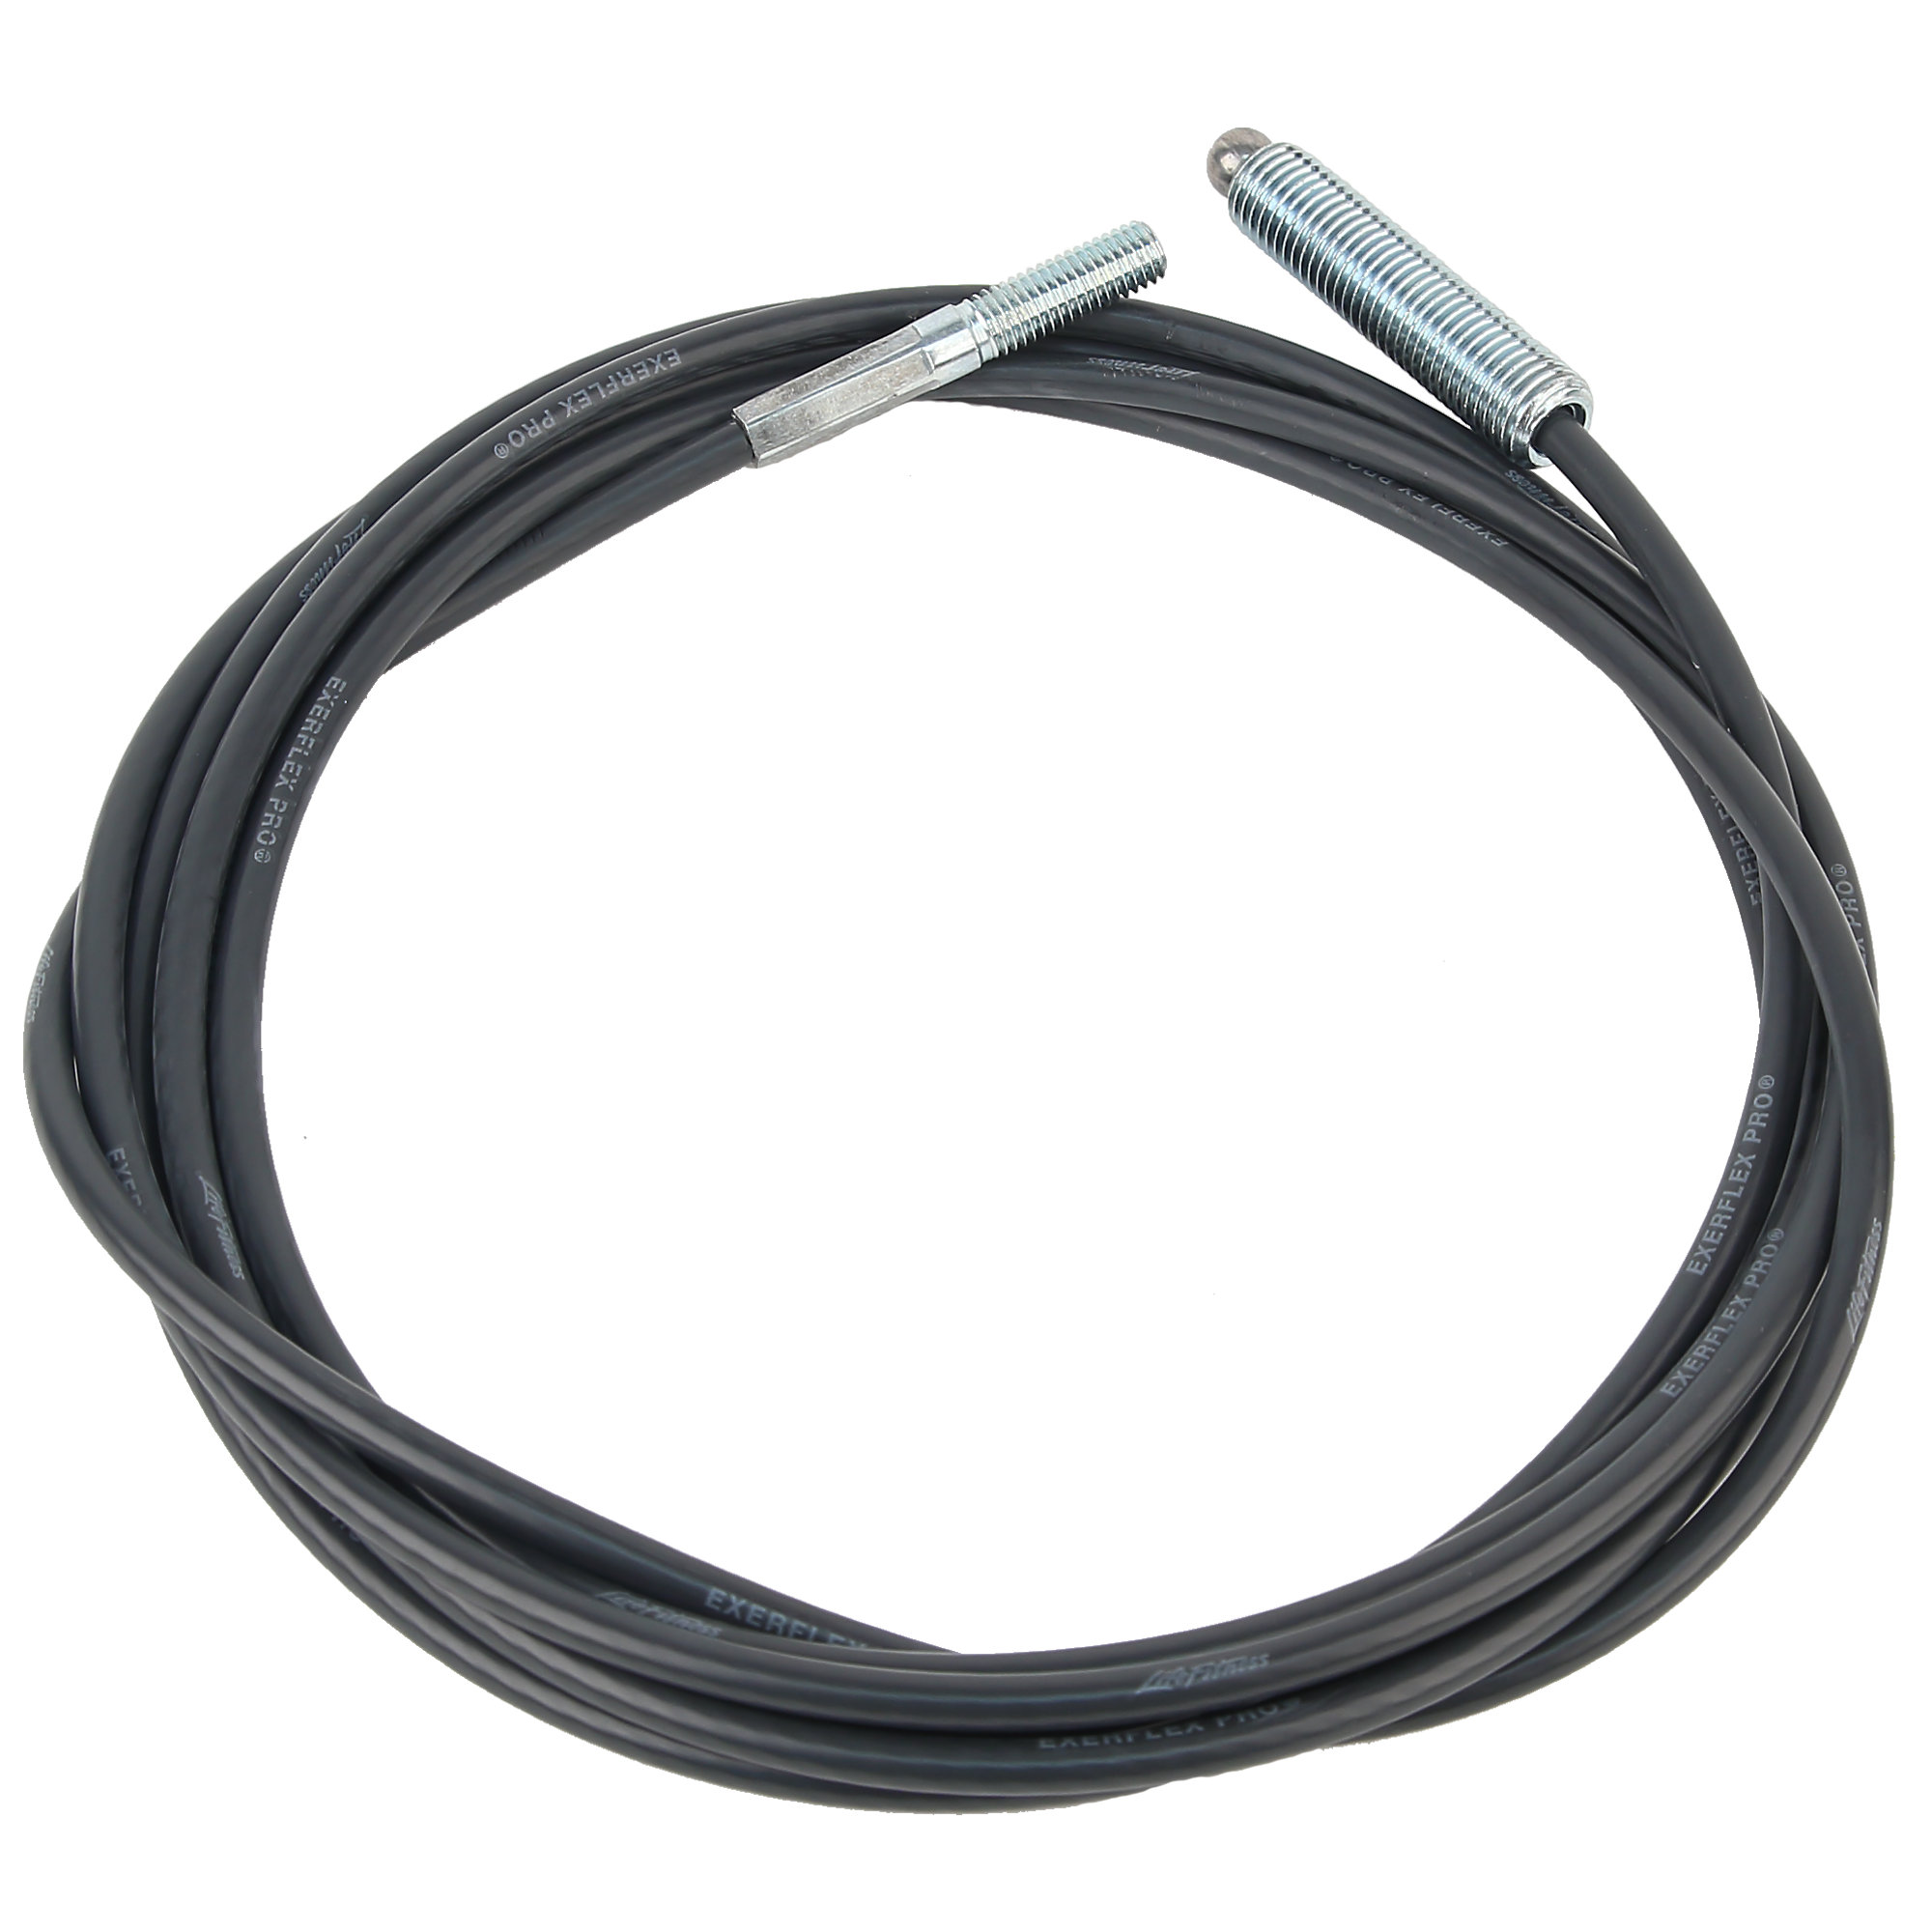 Cable, Bs-Nb2, Se, T1, 209-1/4, LifeFitness